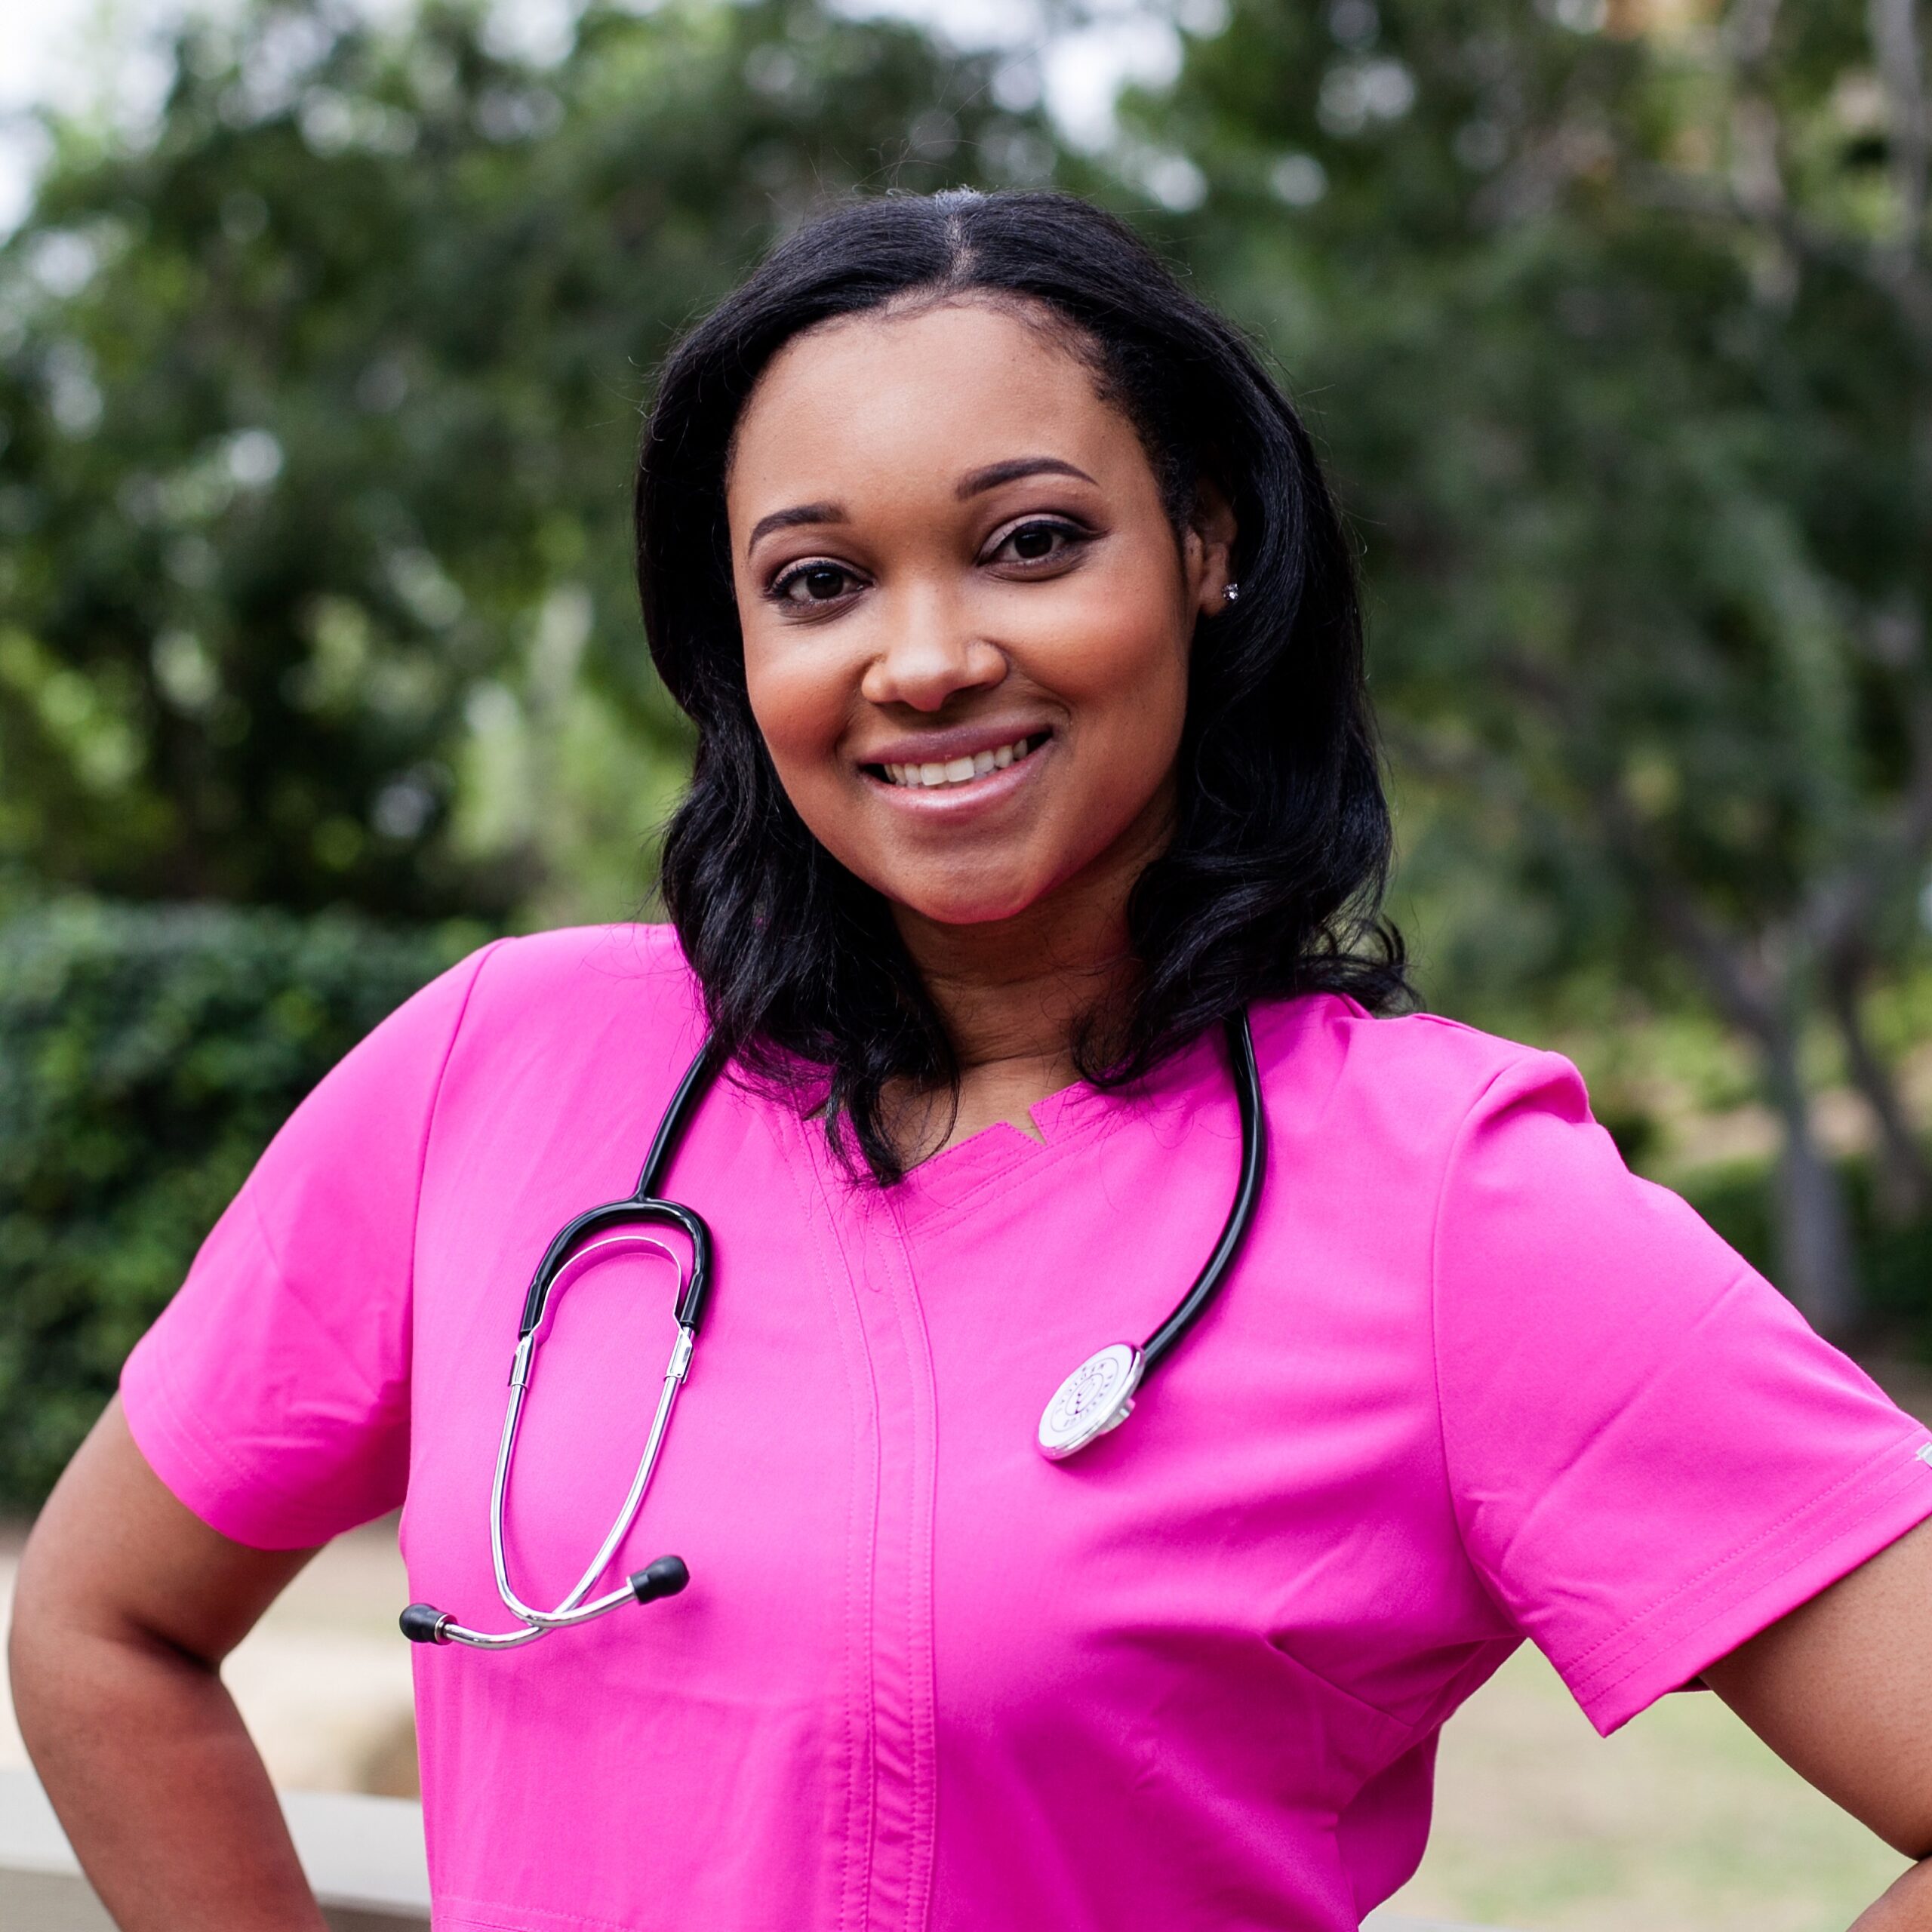 Registered Nurse And Mother Krystal Duhaney Pledges Breastfeeding Education And Advocacy